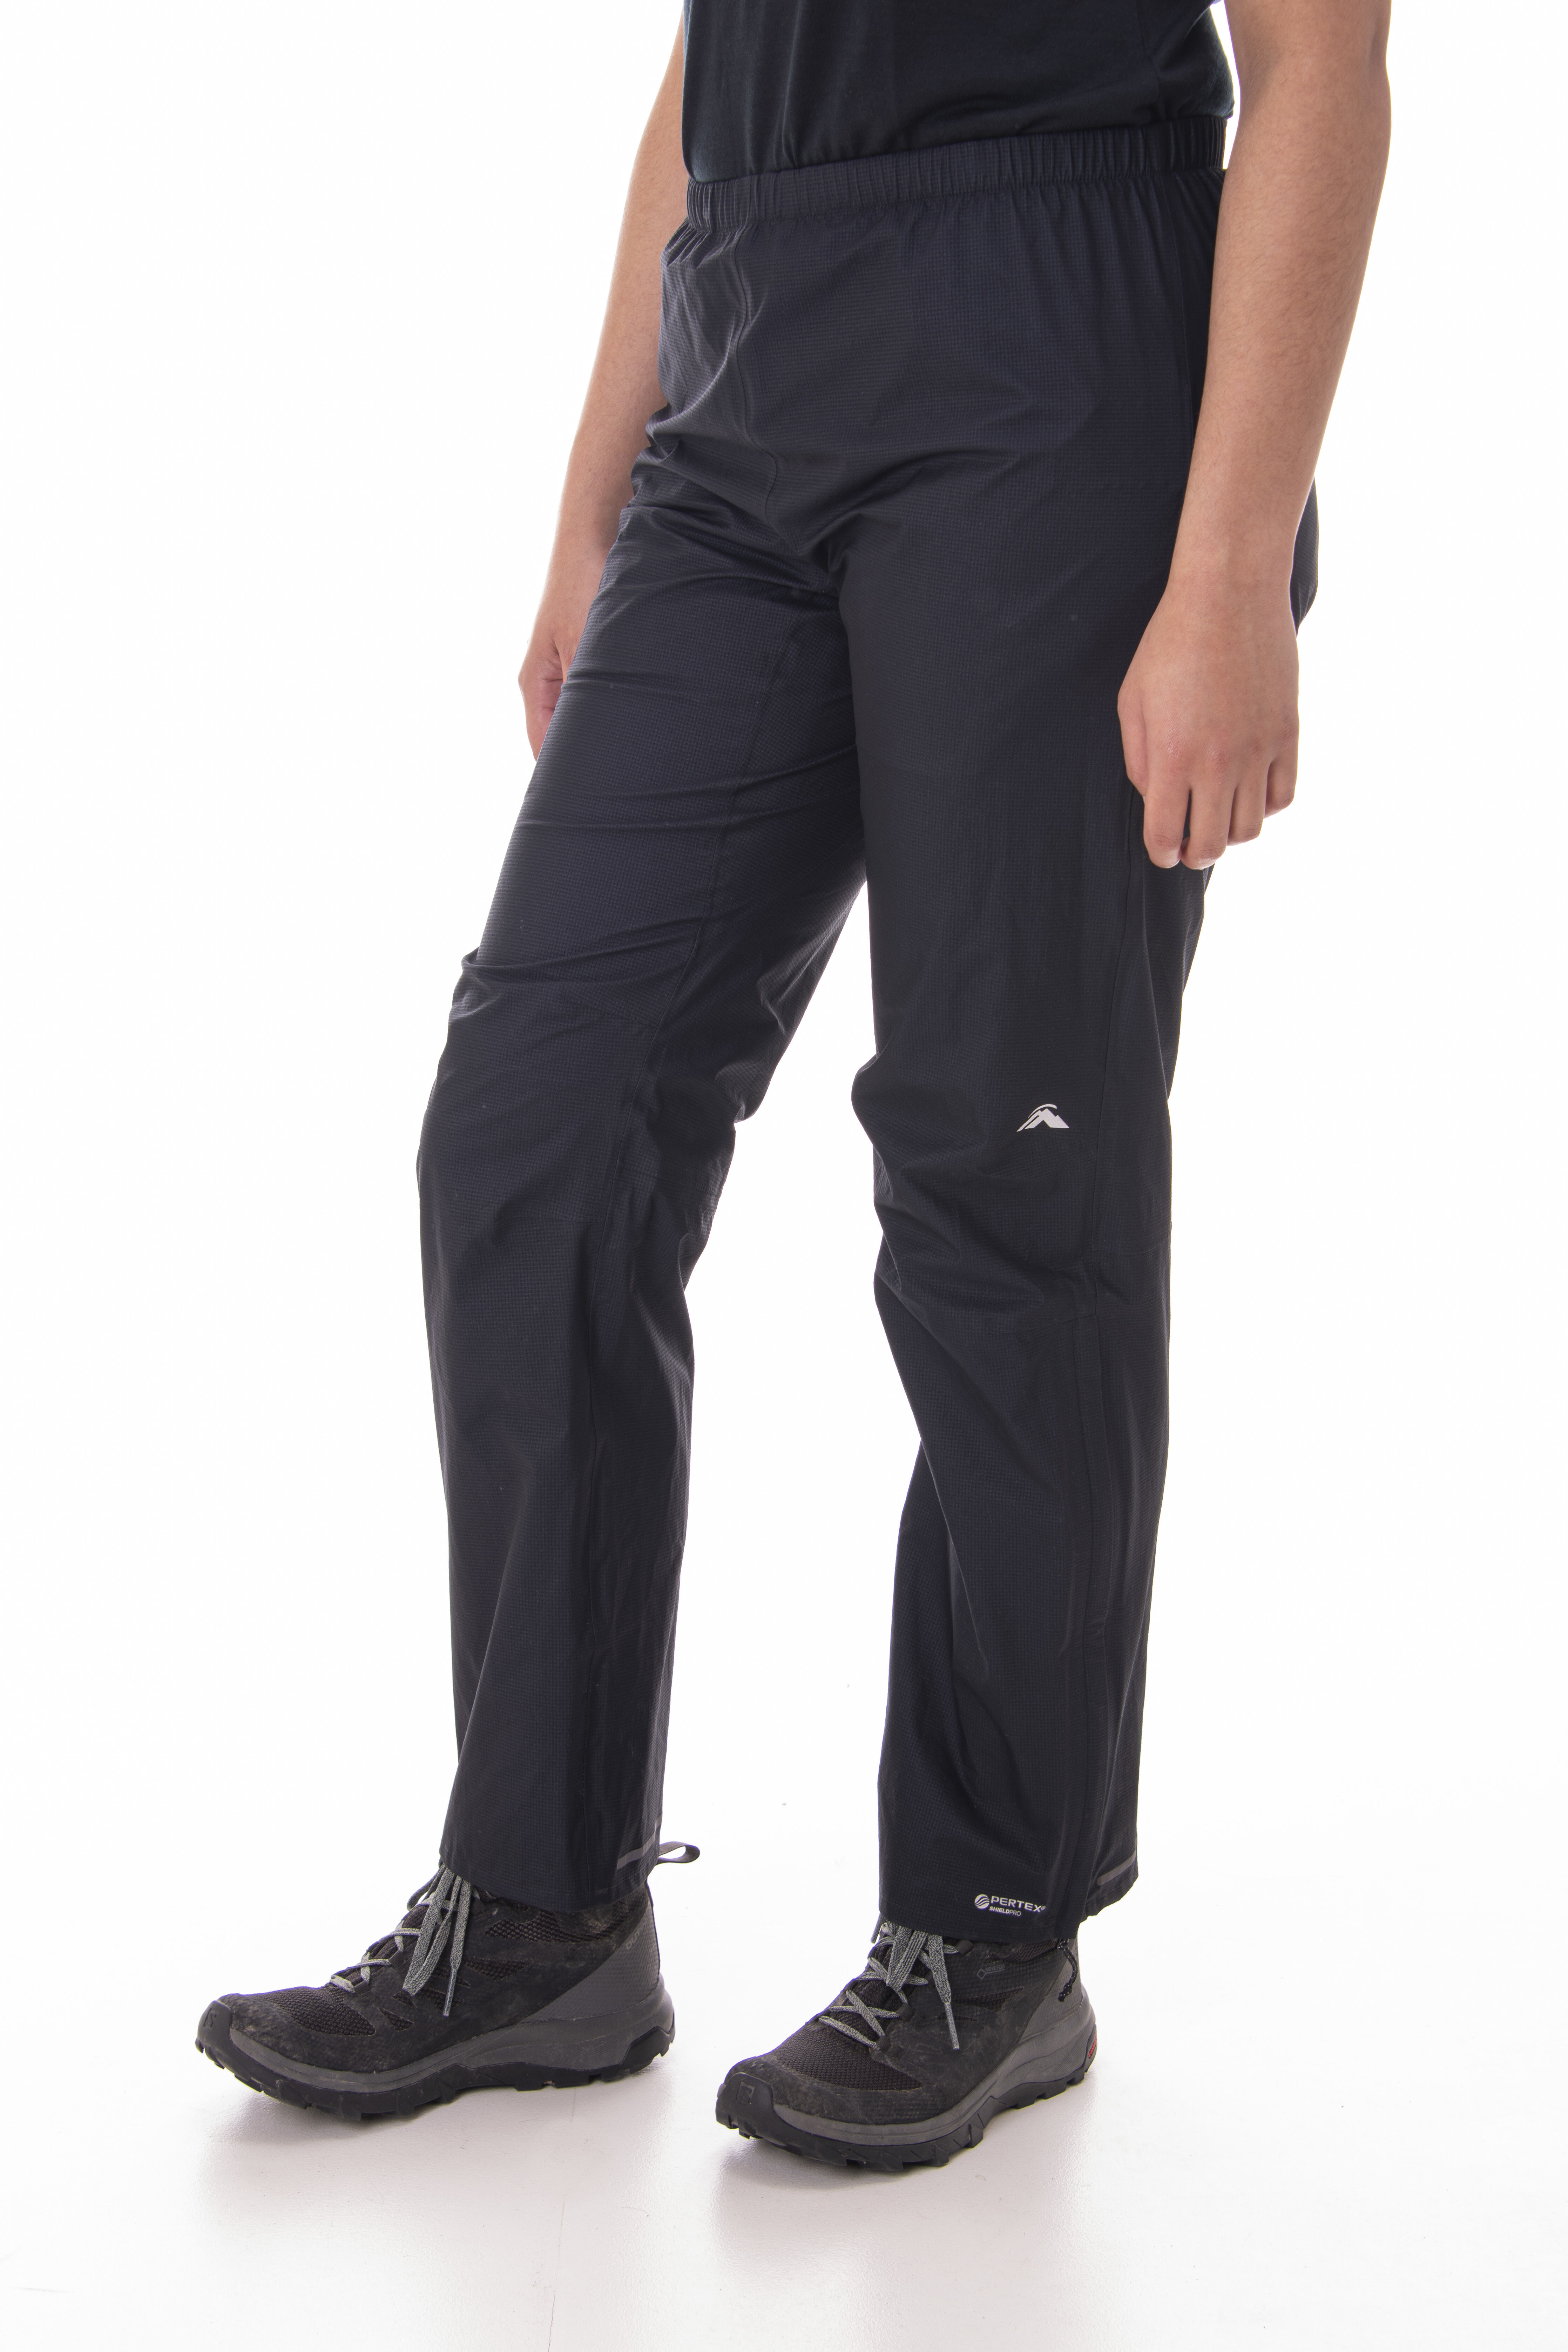 Hunters Element  Oxide Trouser  Waterproof Pants Suited For Anything   Mens  Hunters Element NZ